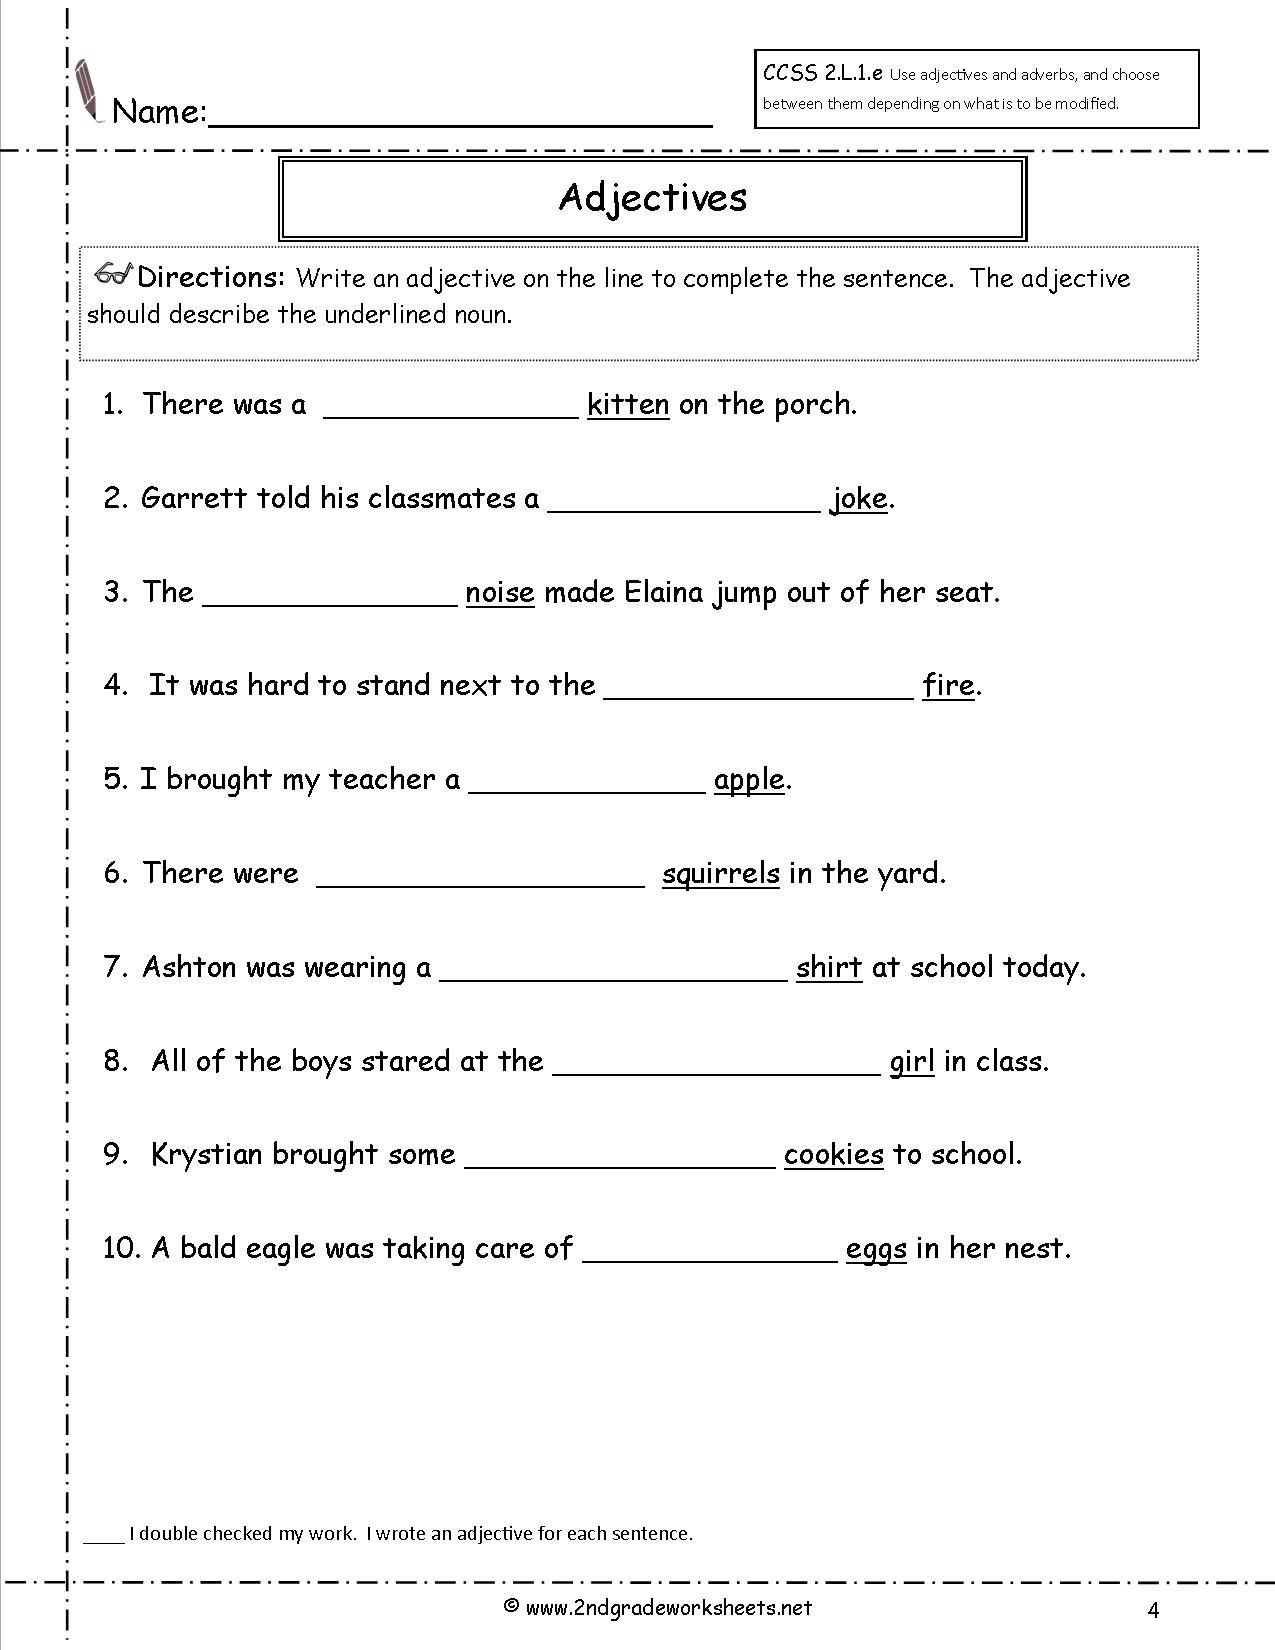 And Fill-In-The-Blanks Type Of Test For Grade 3 Students In English - Free Printable Grammar Worksheets For Highschool Students